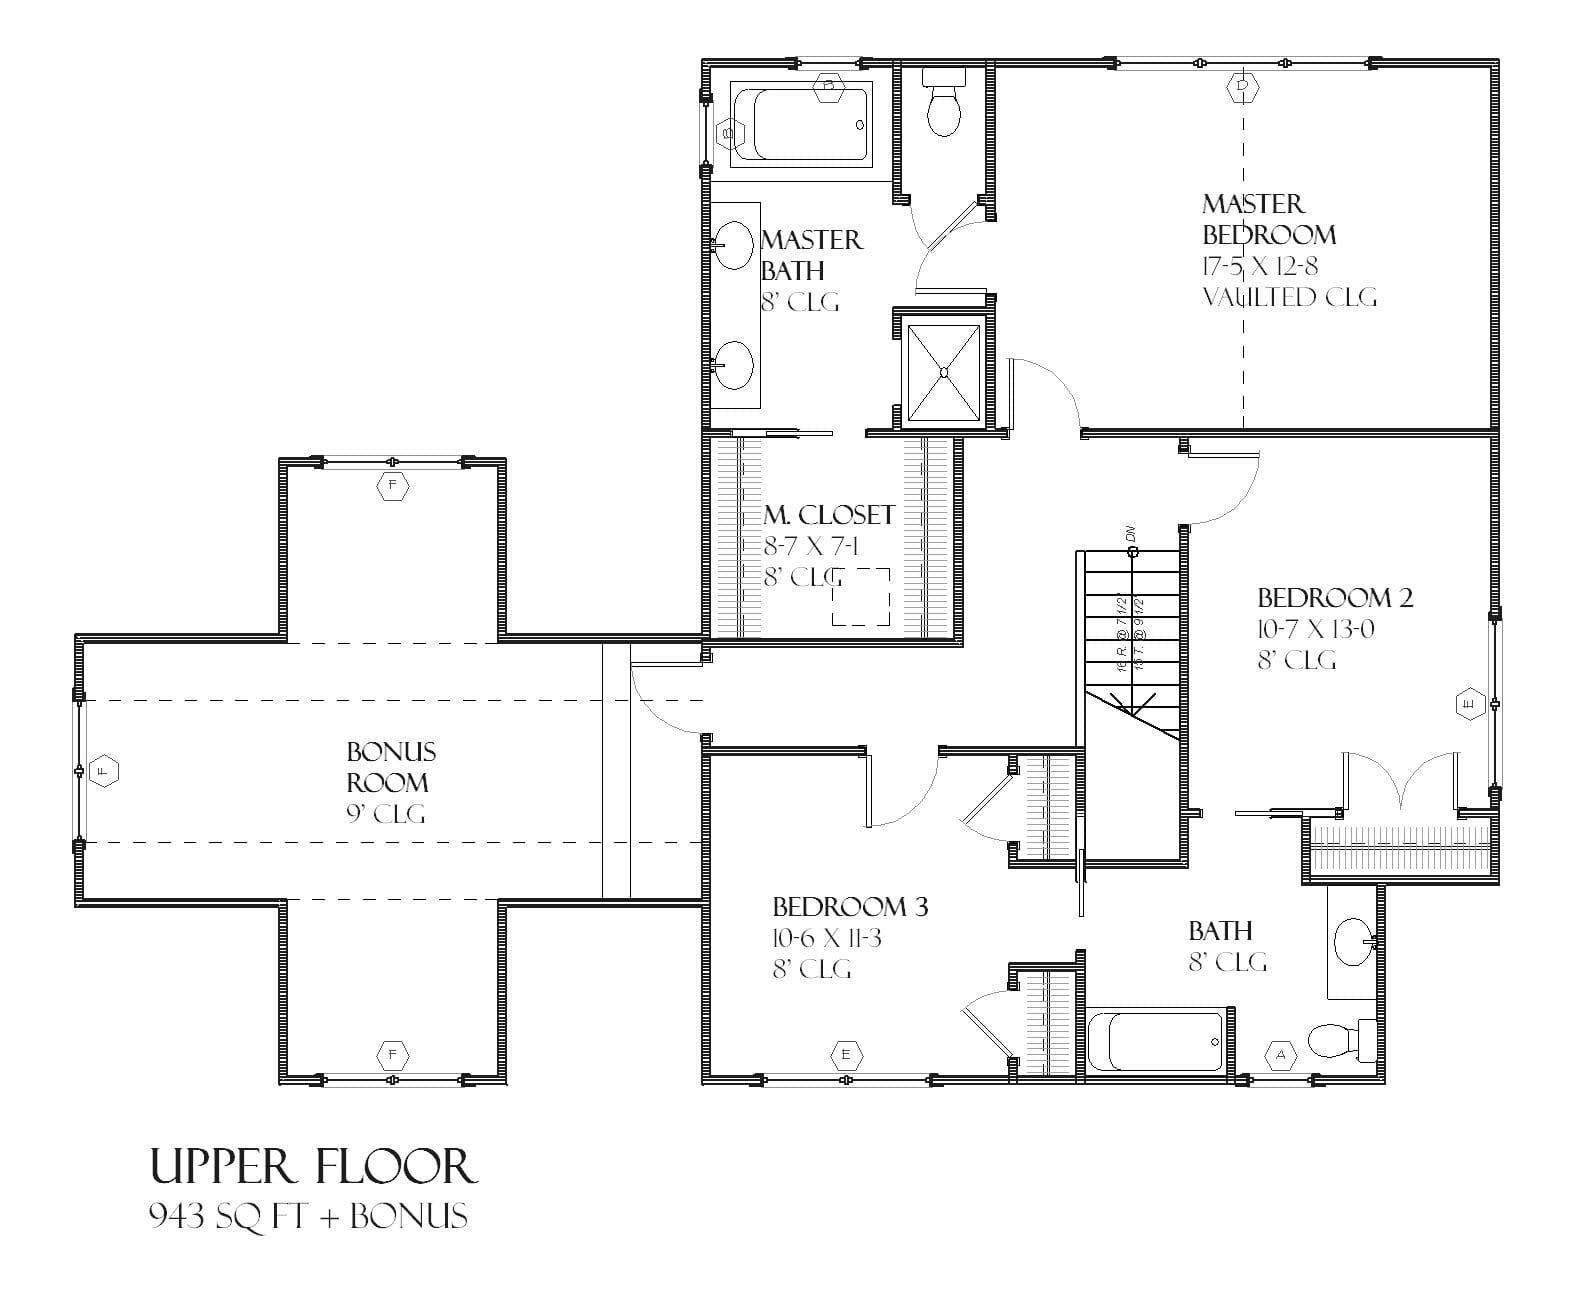 Quincy - Home Design and Floor Plan - SketchPad House Plans